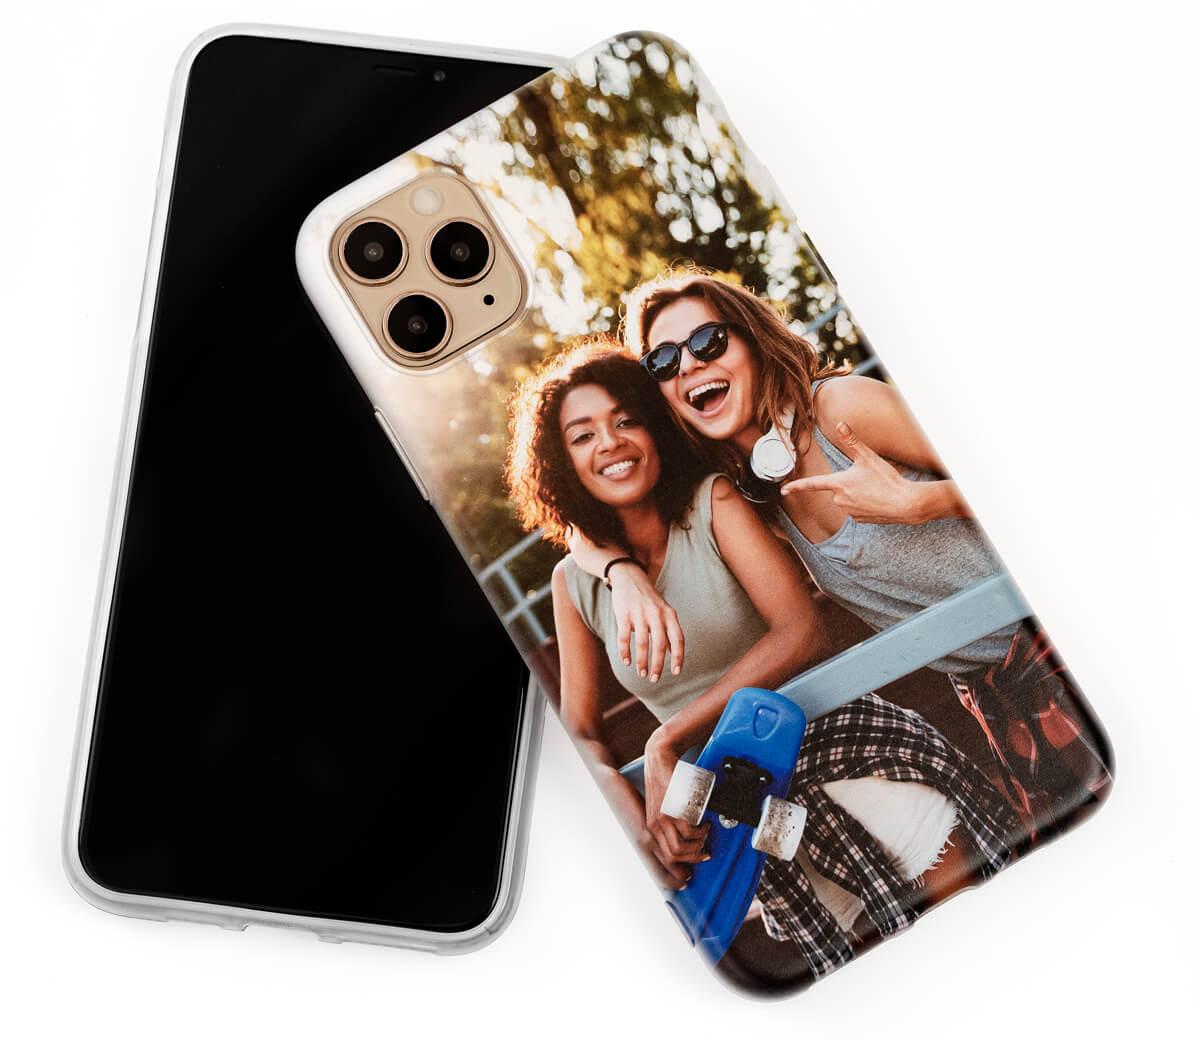 Personalised iPhone 11 Pro Max Case, Personalised Hard Case